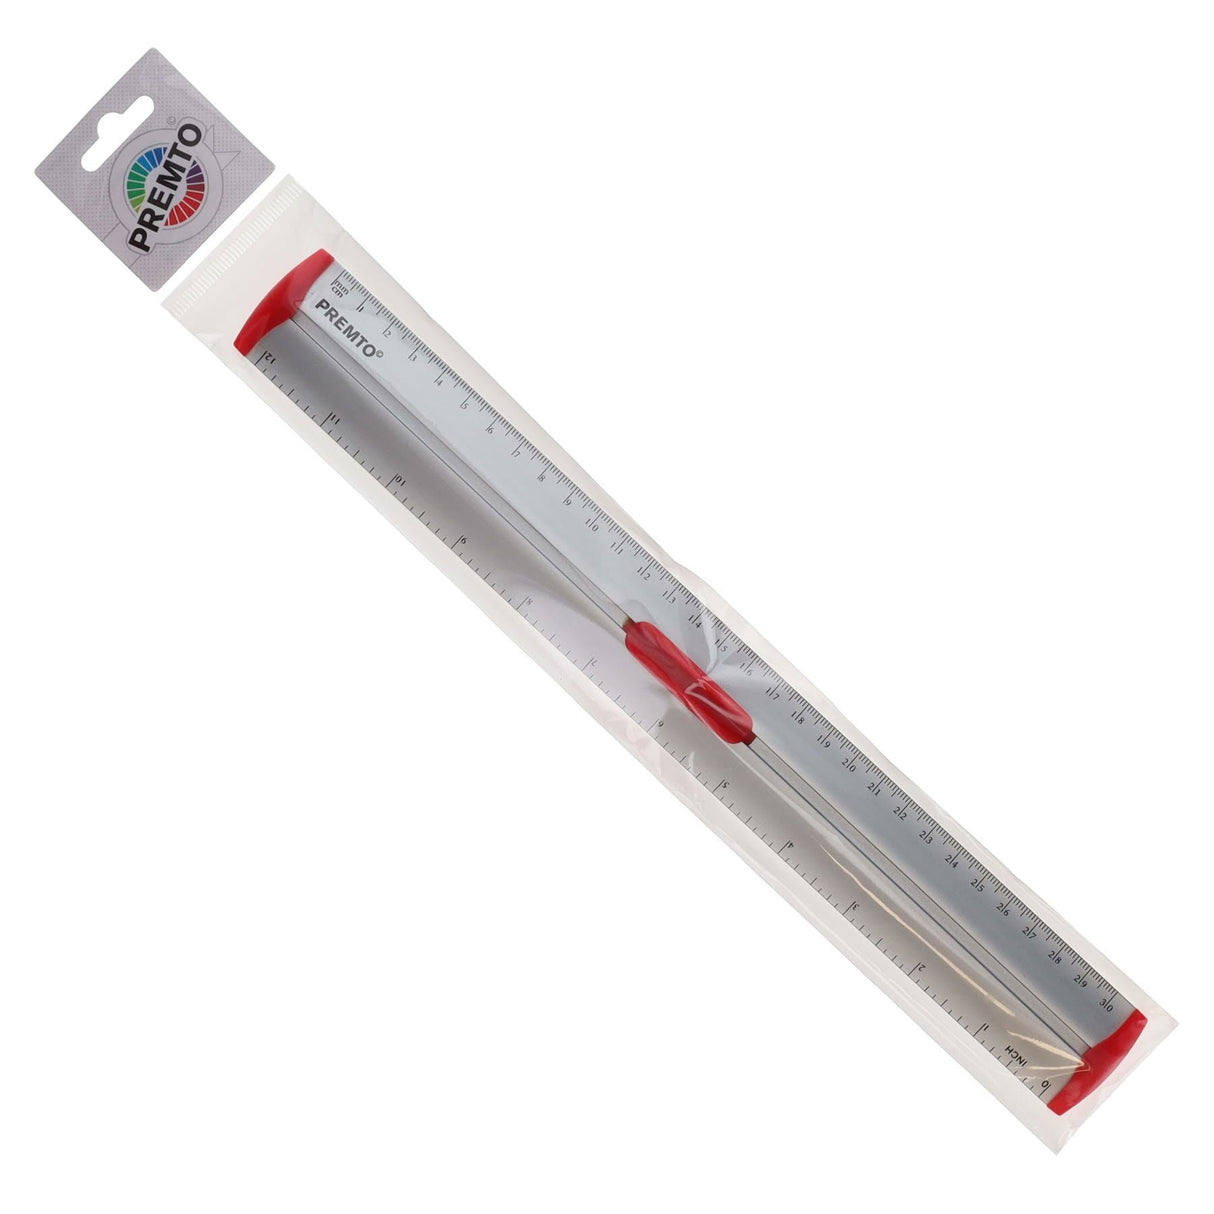 Premto S1 Aluminum Ruler With Grip 30cm - Ketchup Red | Stationery Shop UK